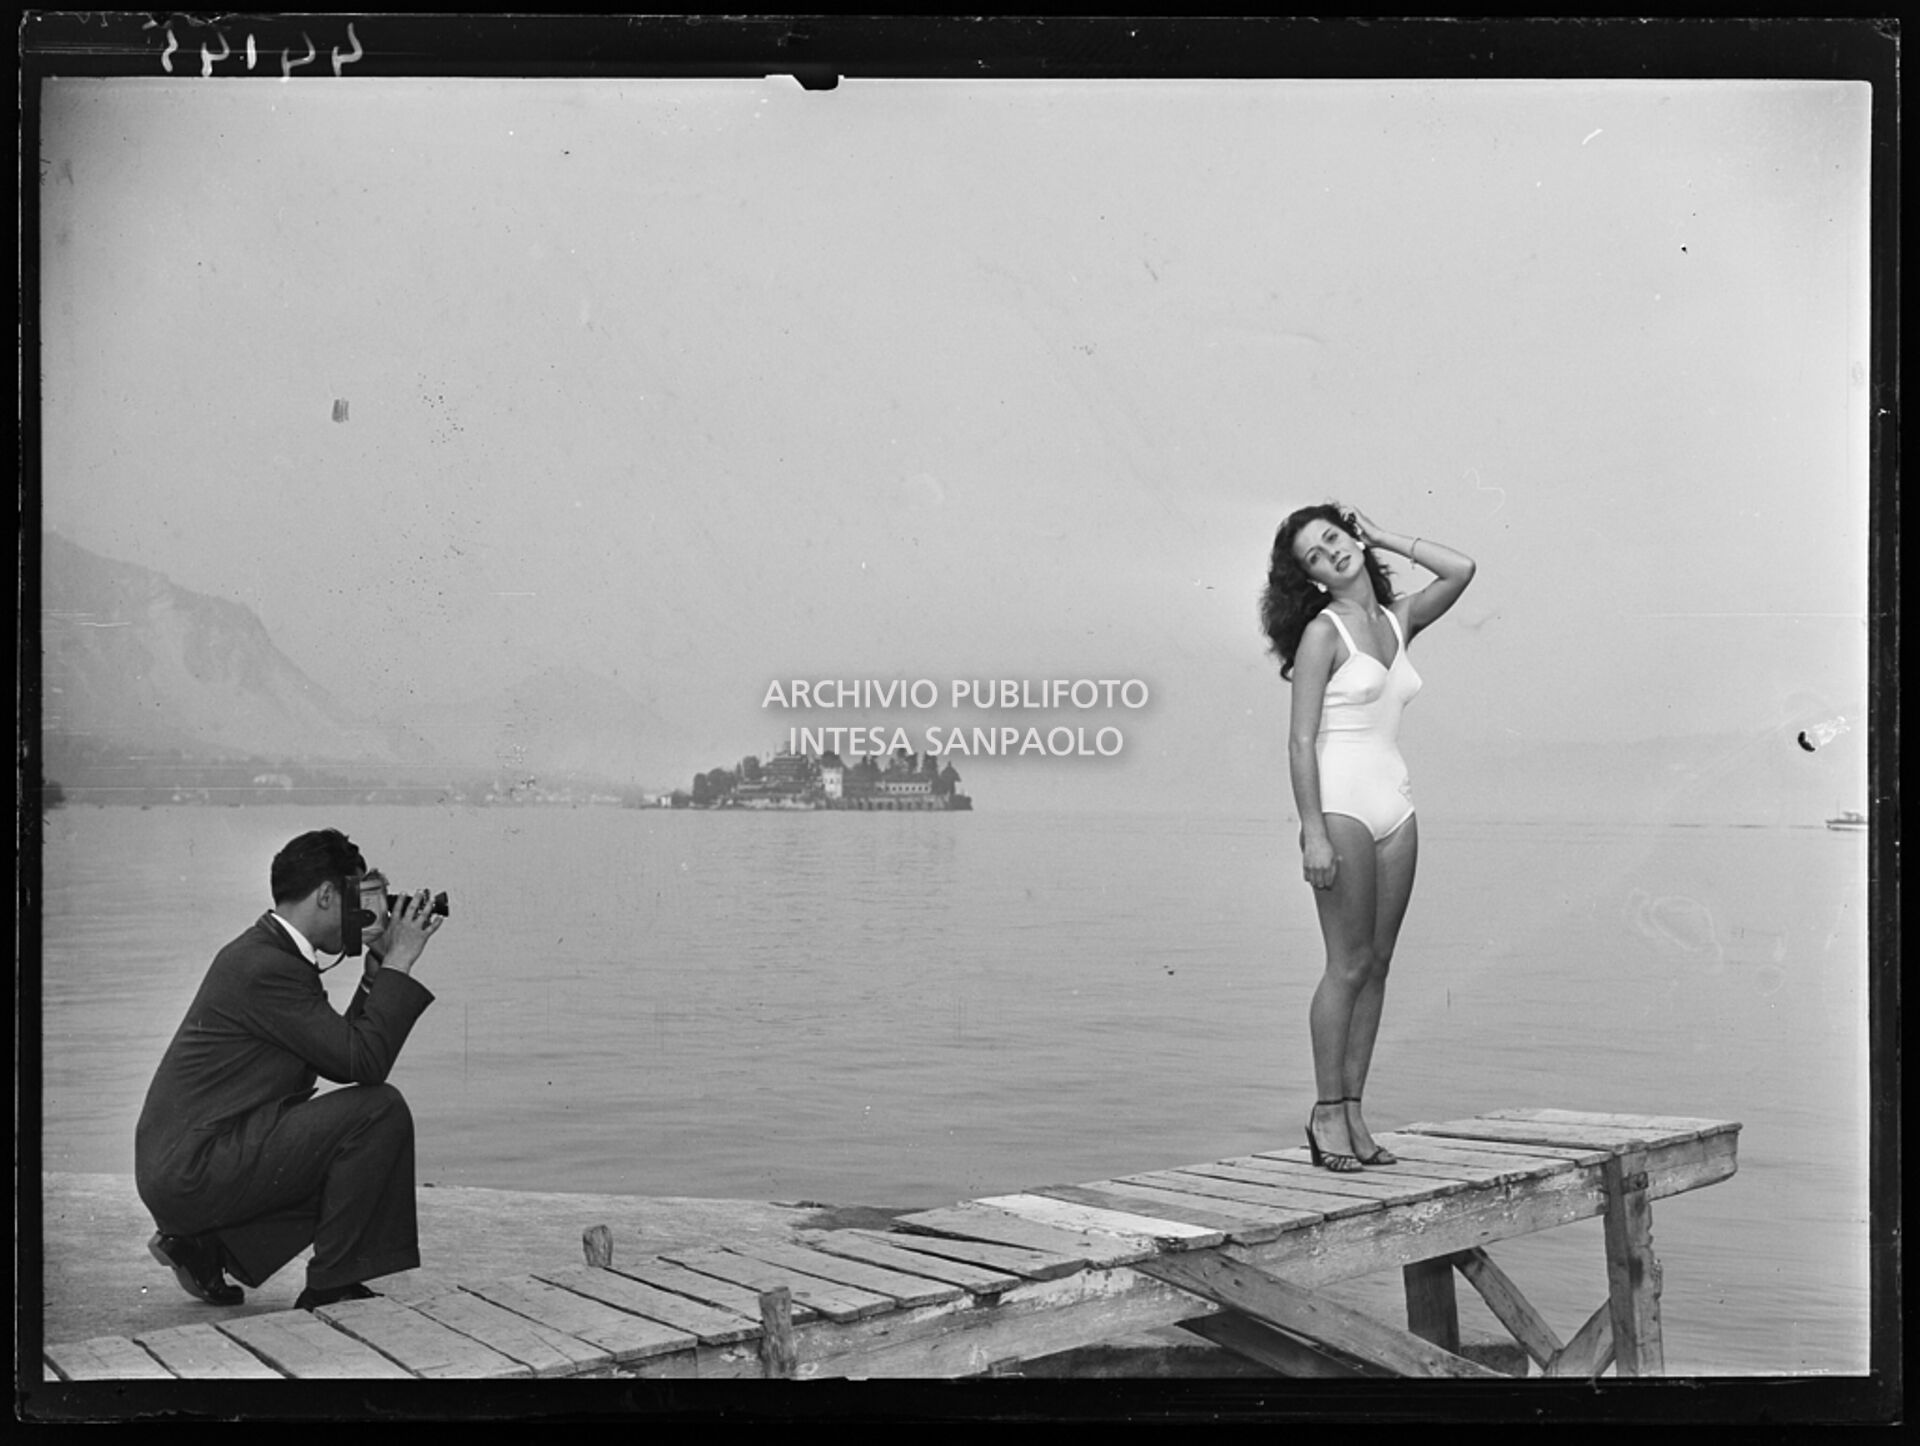 Ornella Zamperetti, second place in Miss Italia contest, poses in a swimsuit for a photographer in Stresa